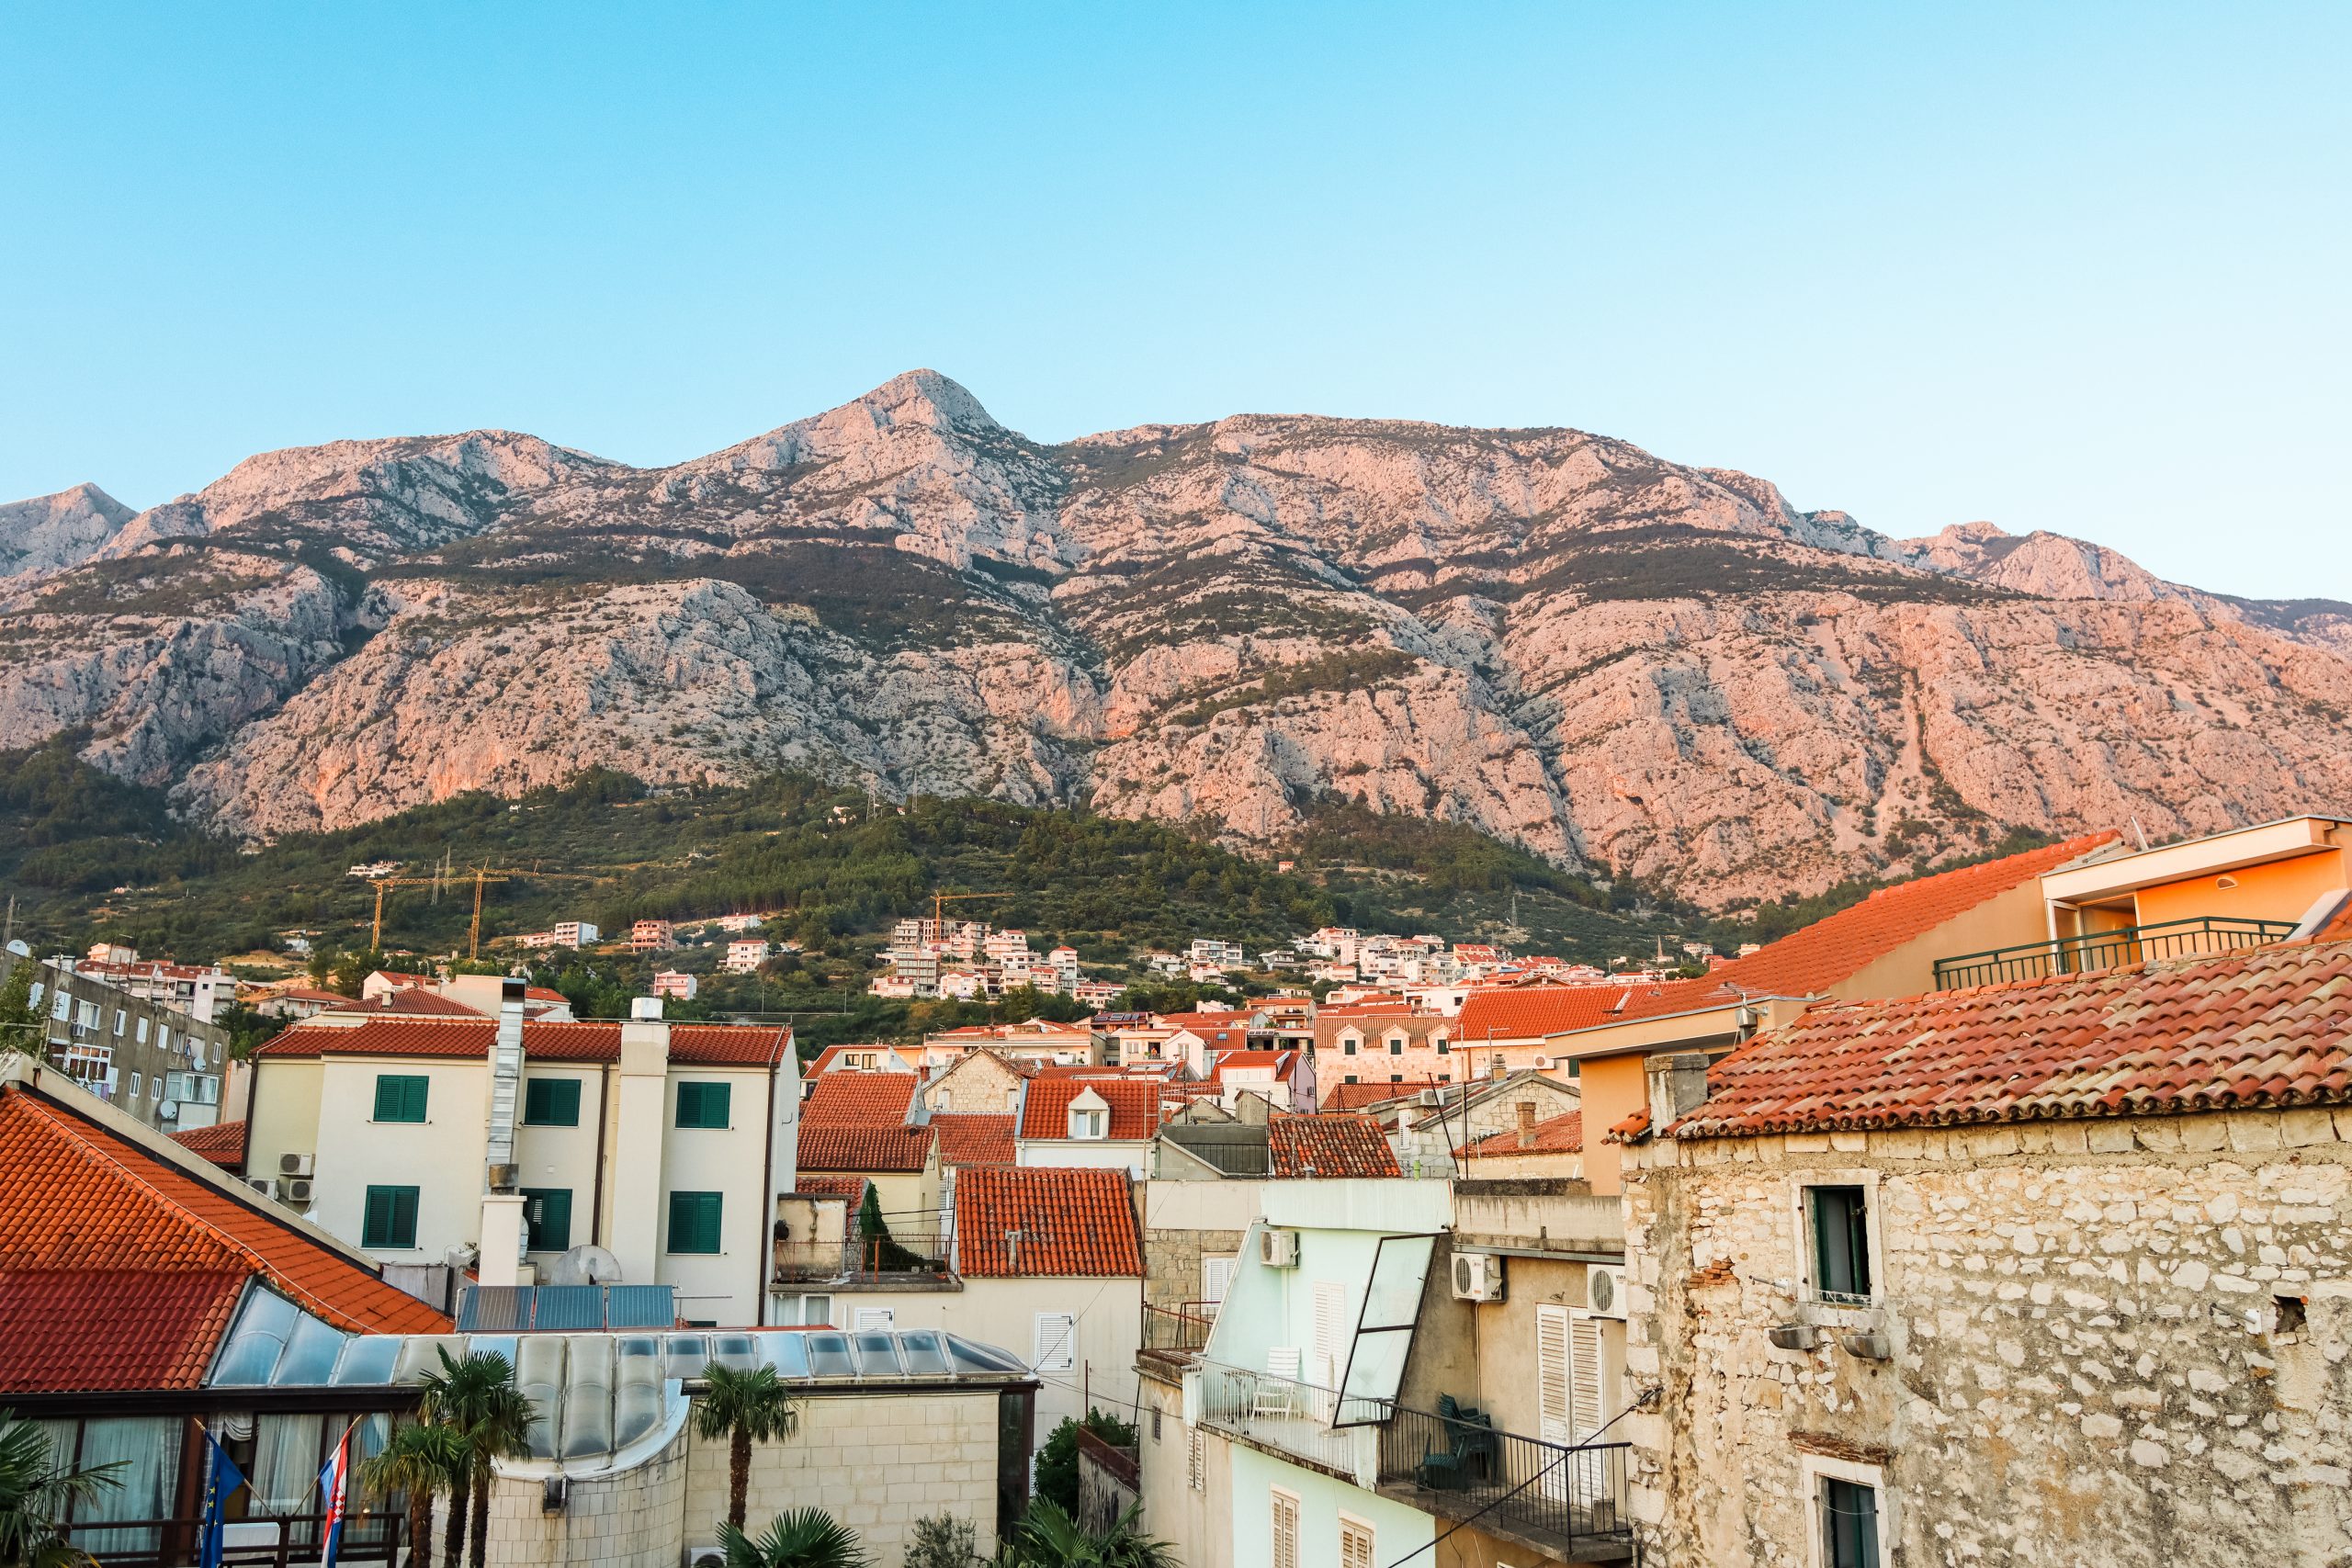 Mountains during sunset with Makarksa old town in the background. Things to see in Makarska